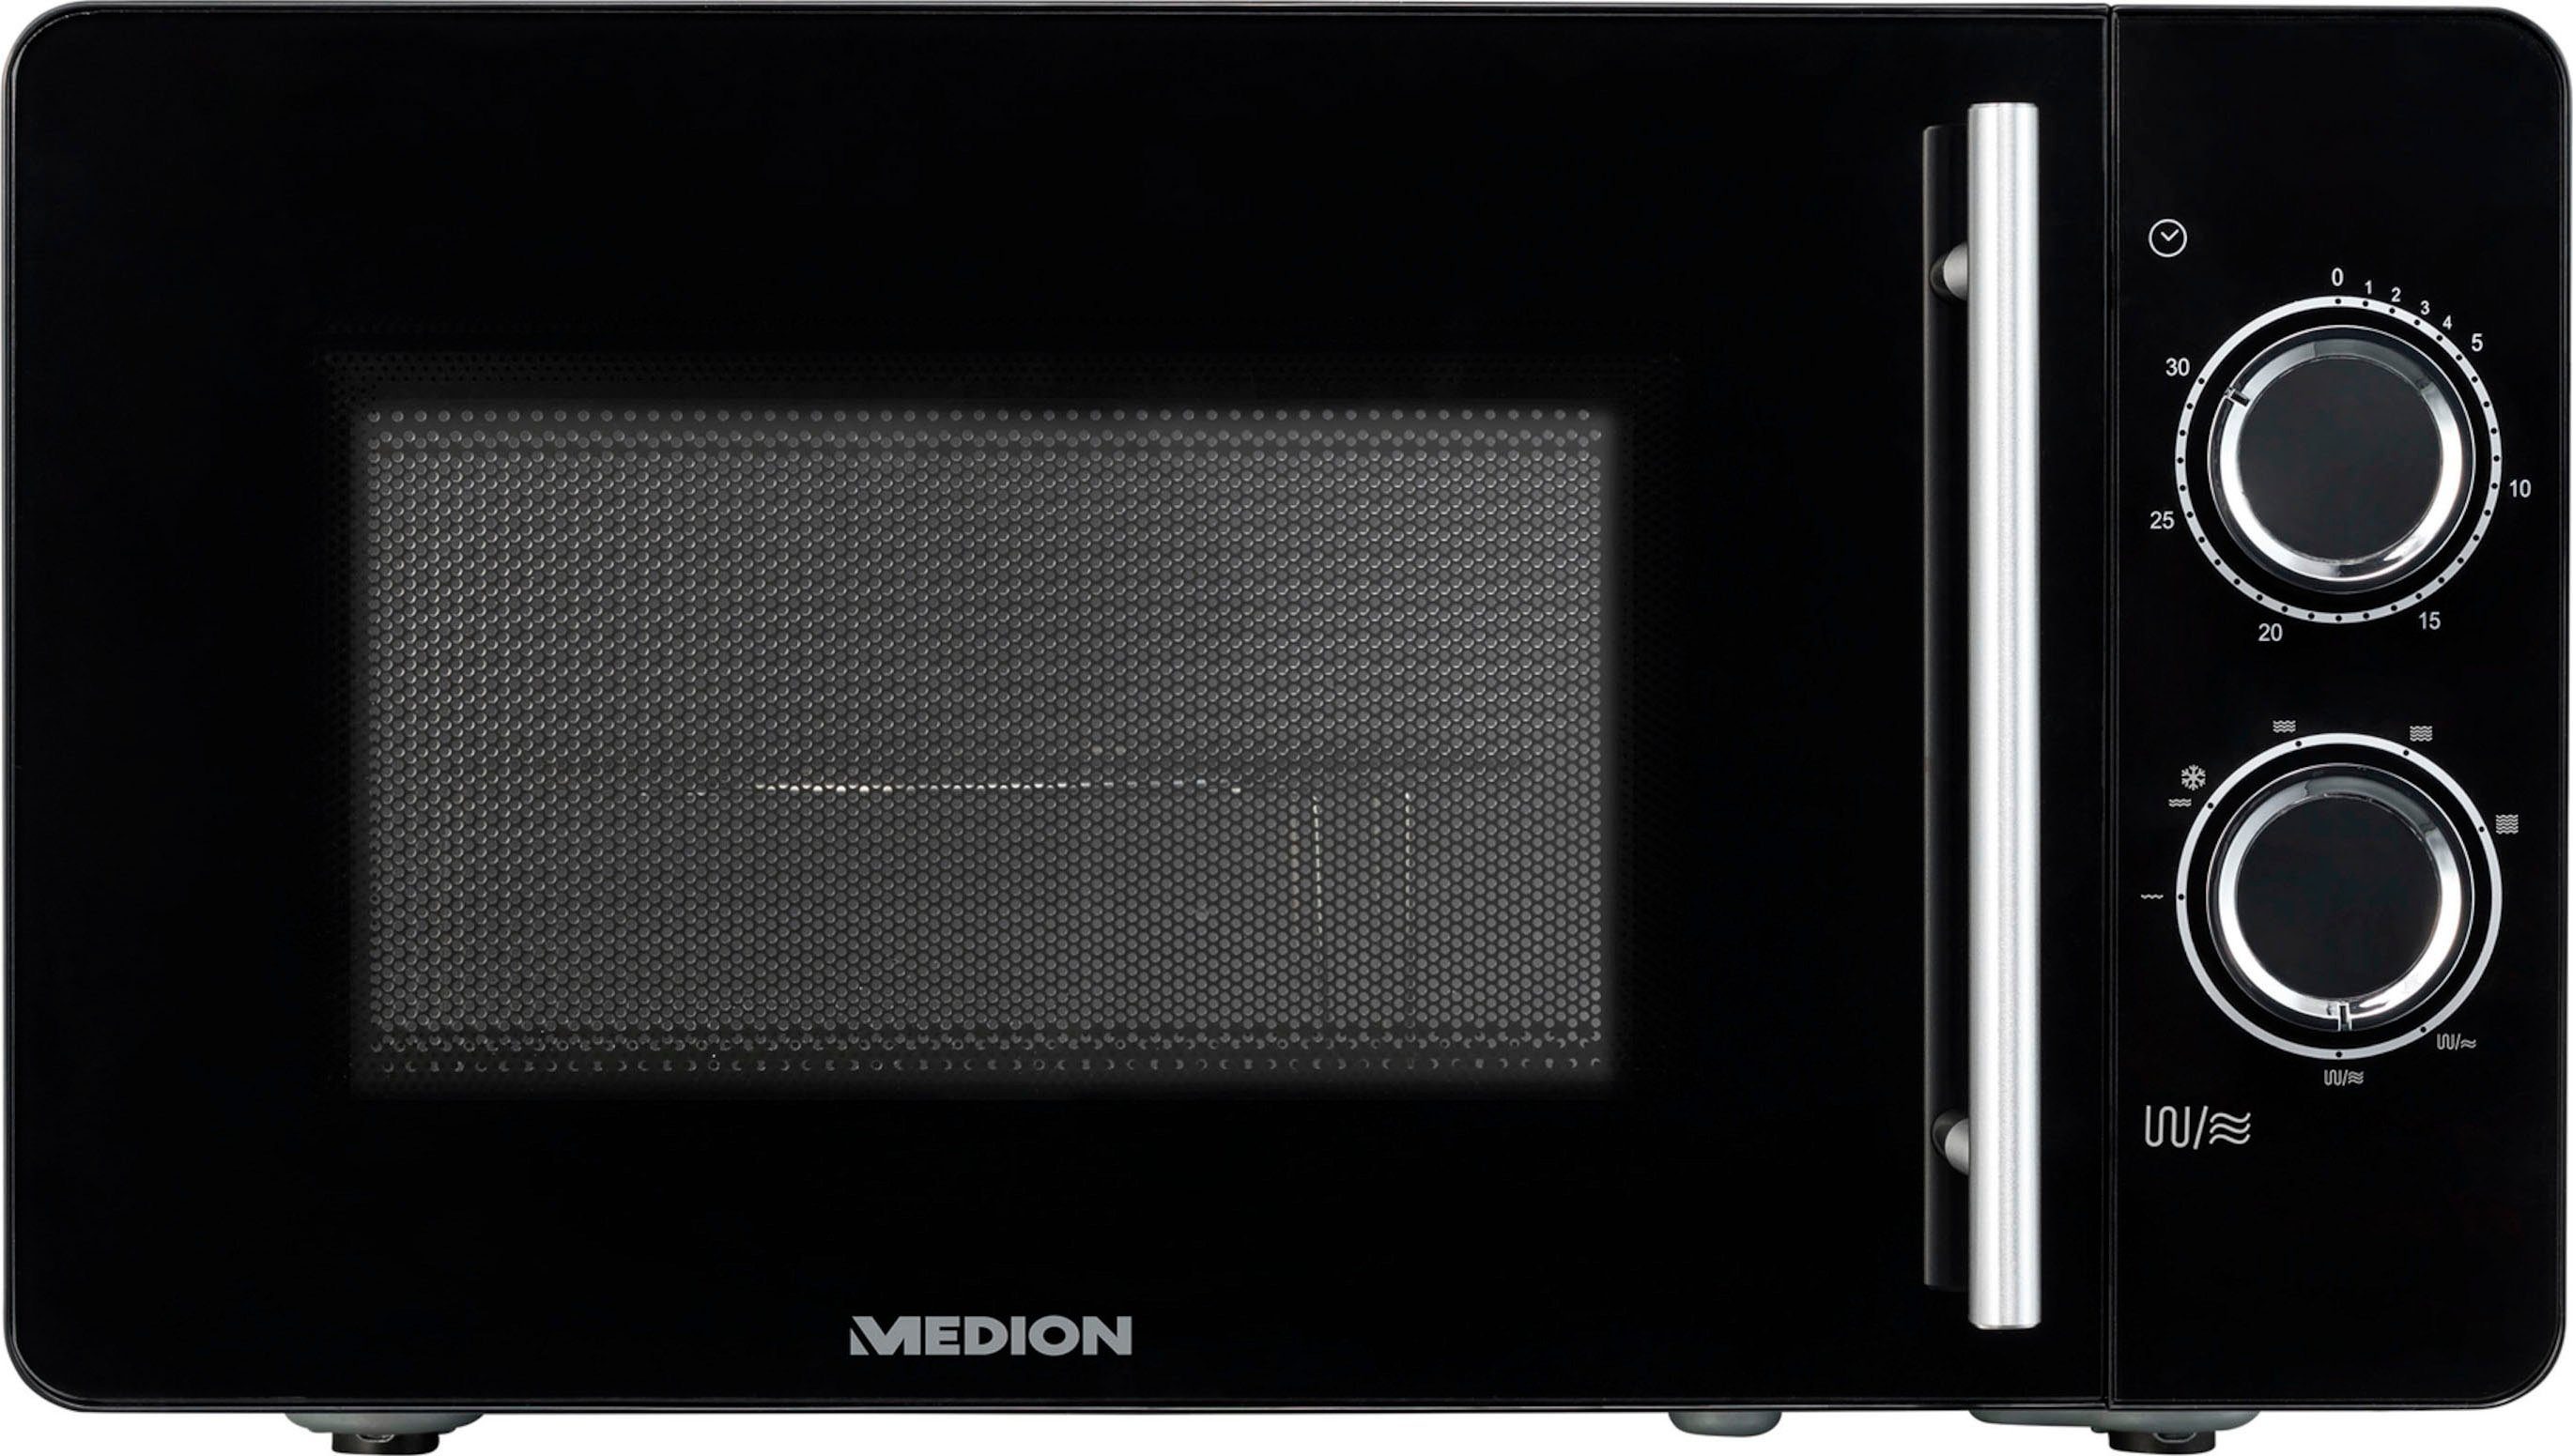 Medion® Mikrowelle MD 10495, Grill, Mikrowelle, 20 l, Kombination aus  Mikrowelle und Grill